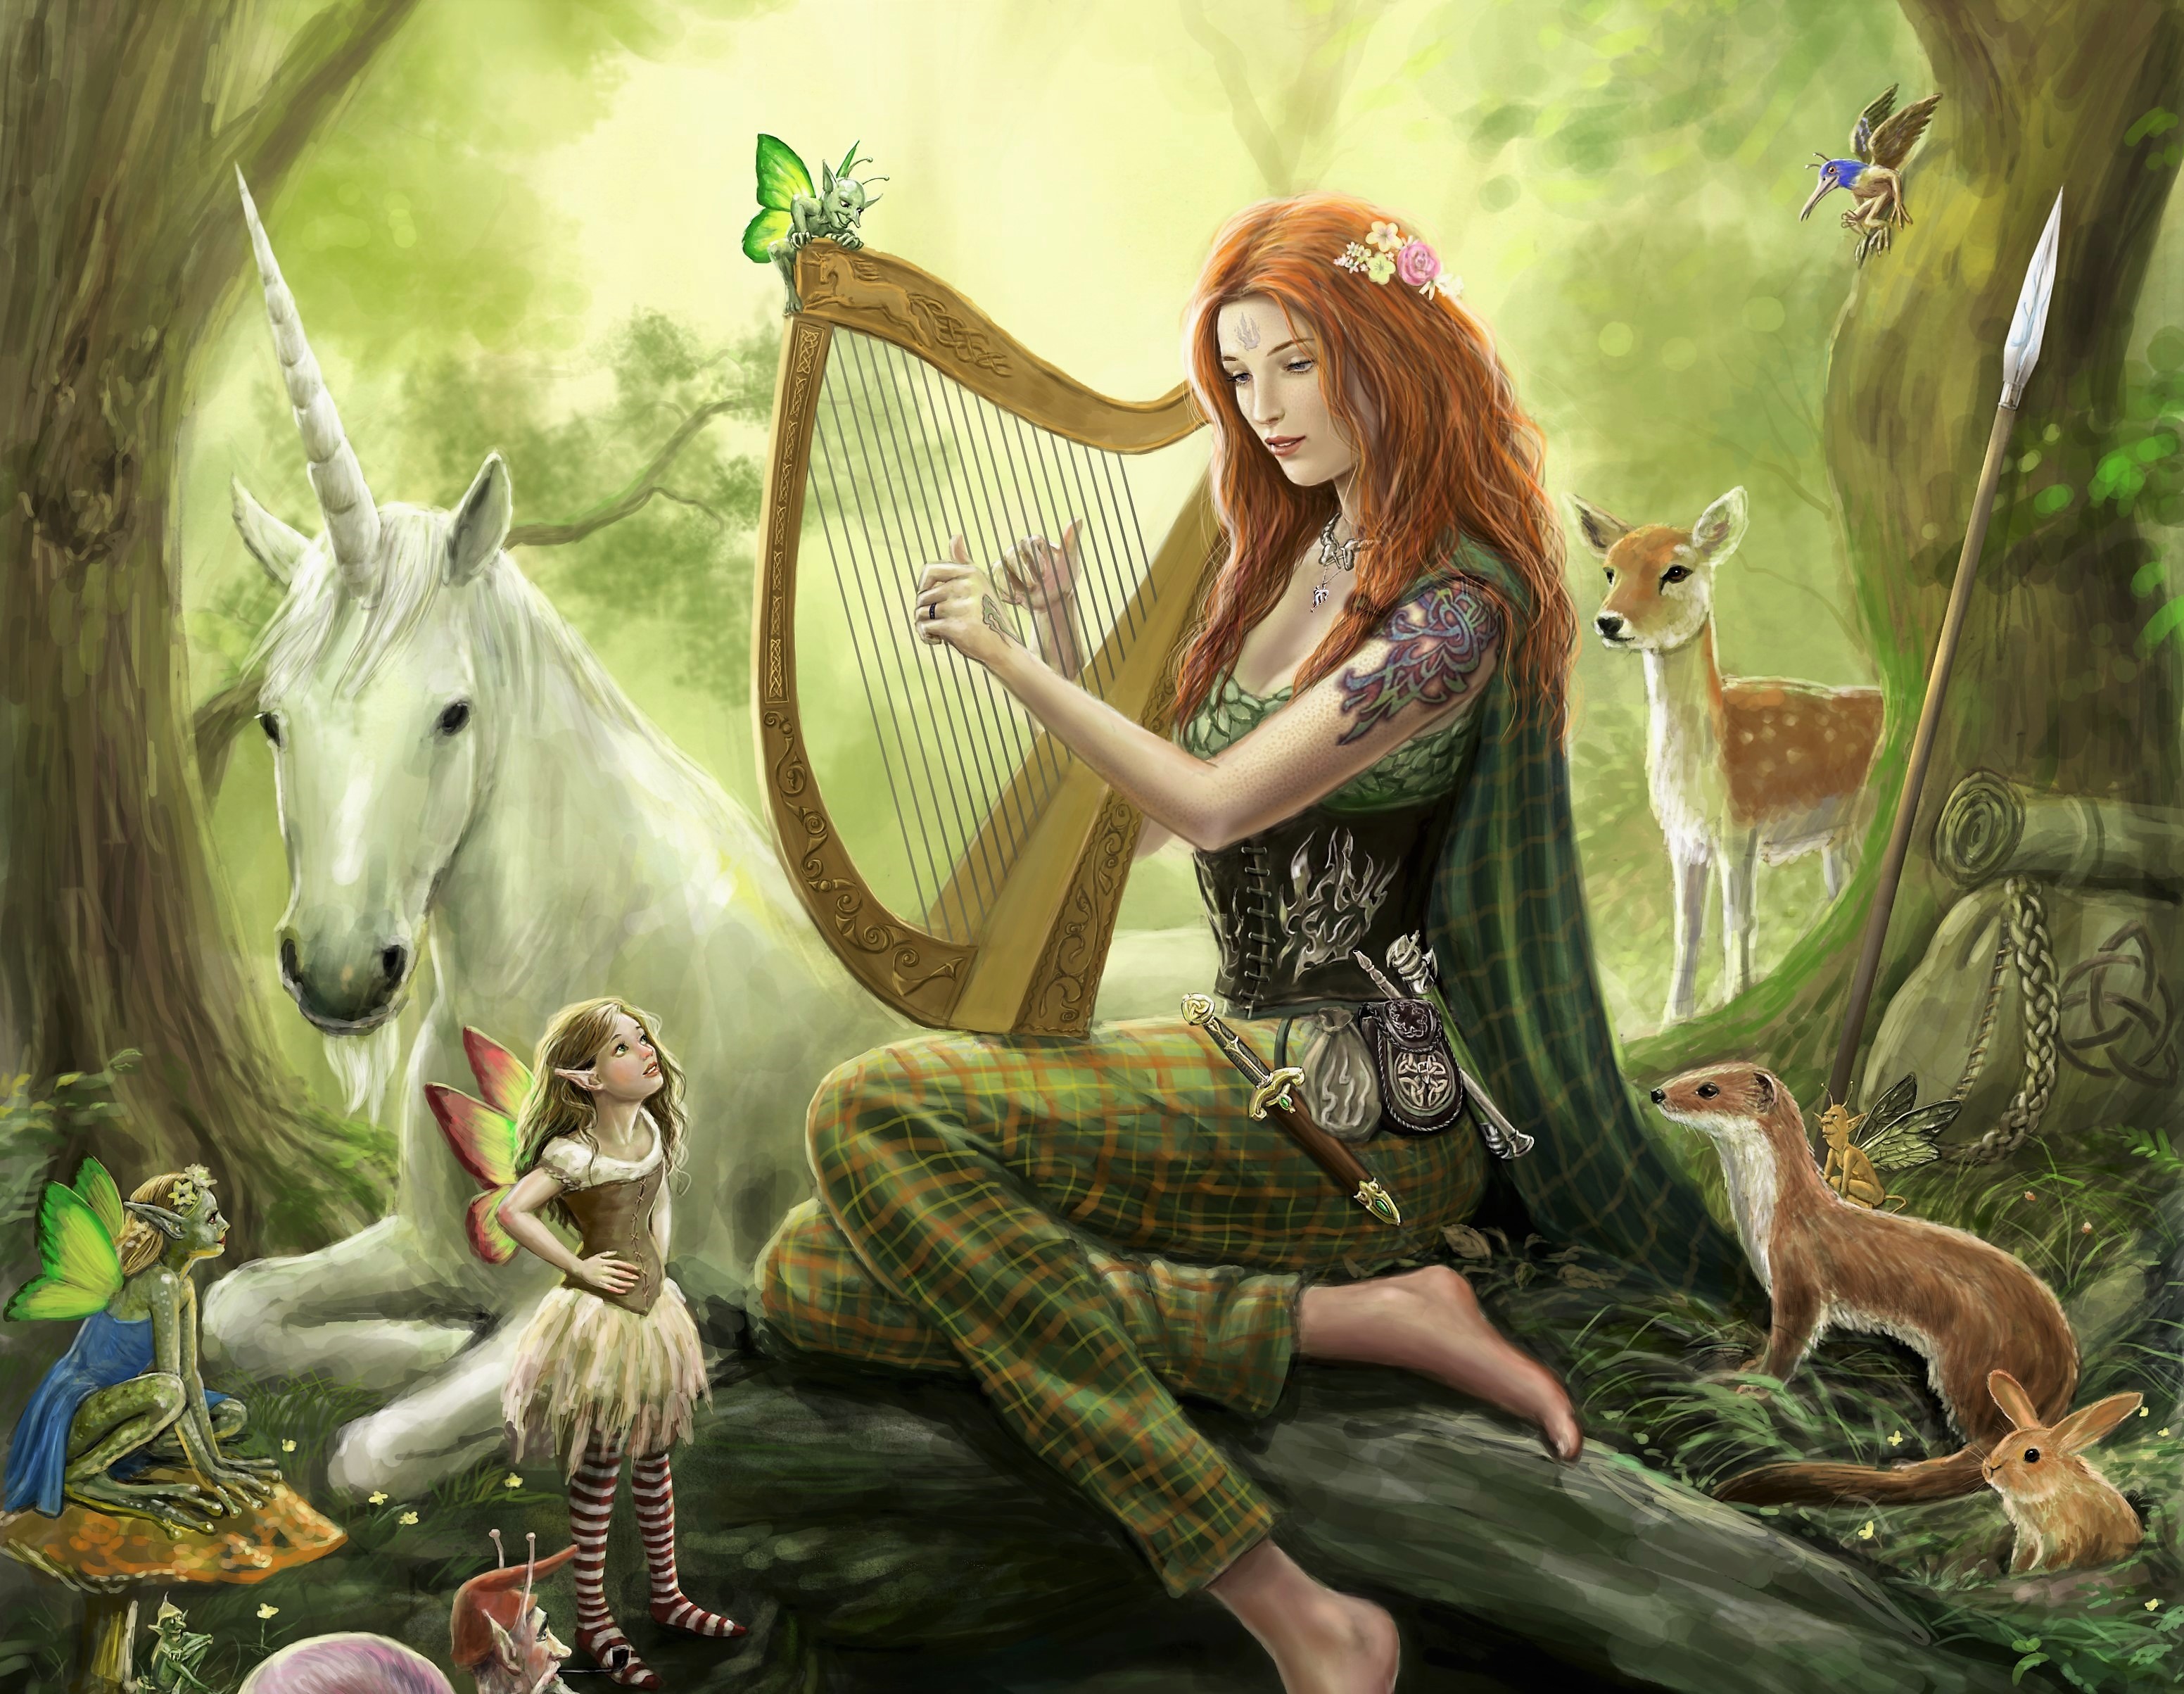 Fairies in Enchanted Forest HD Wallpaper. Background Image